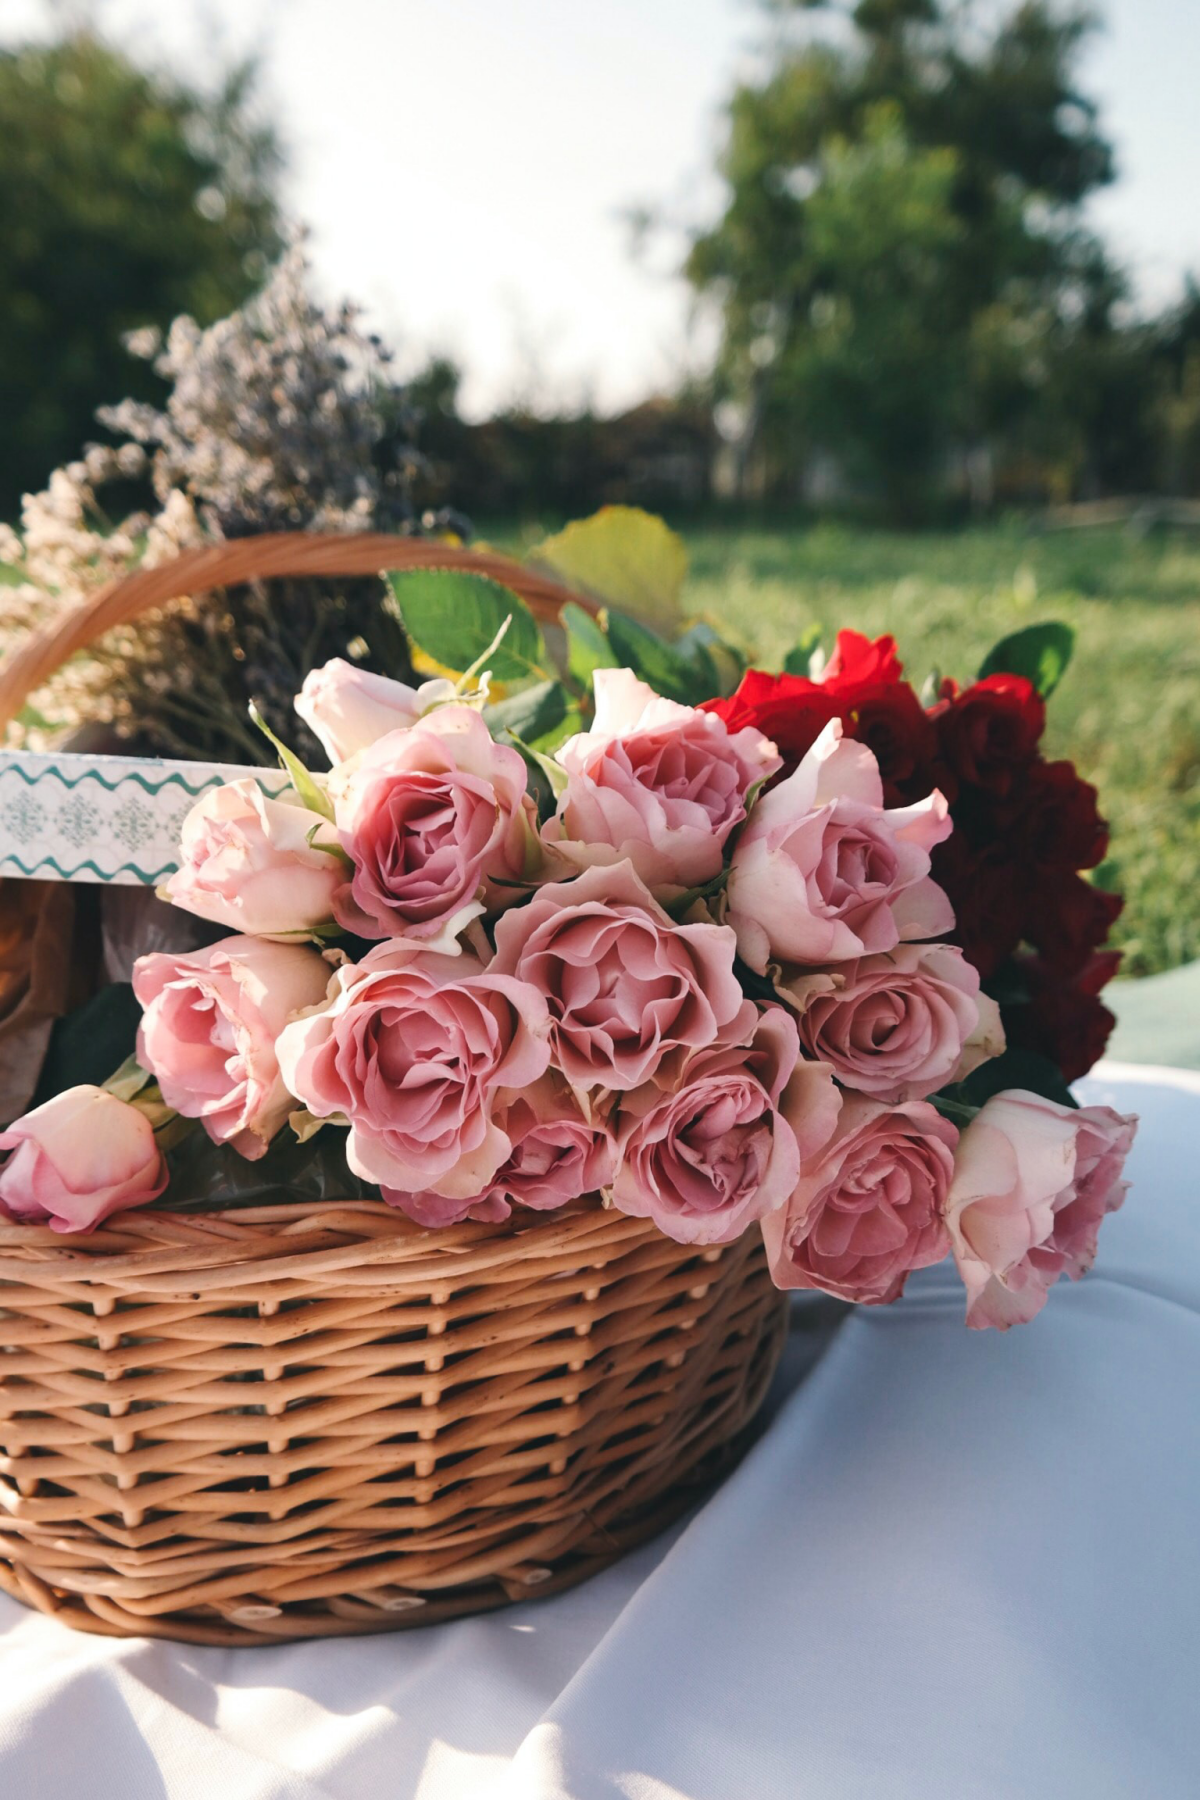 how to dry rose petals basket full of roses